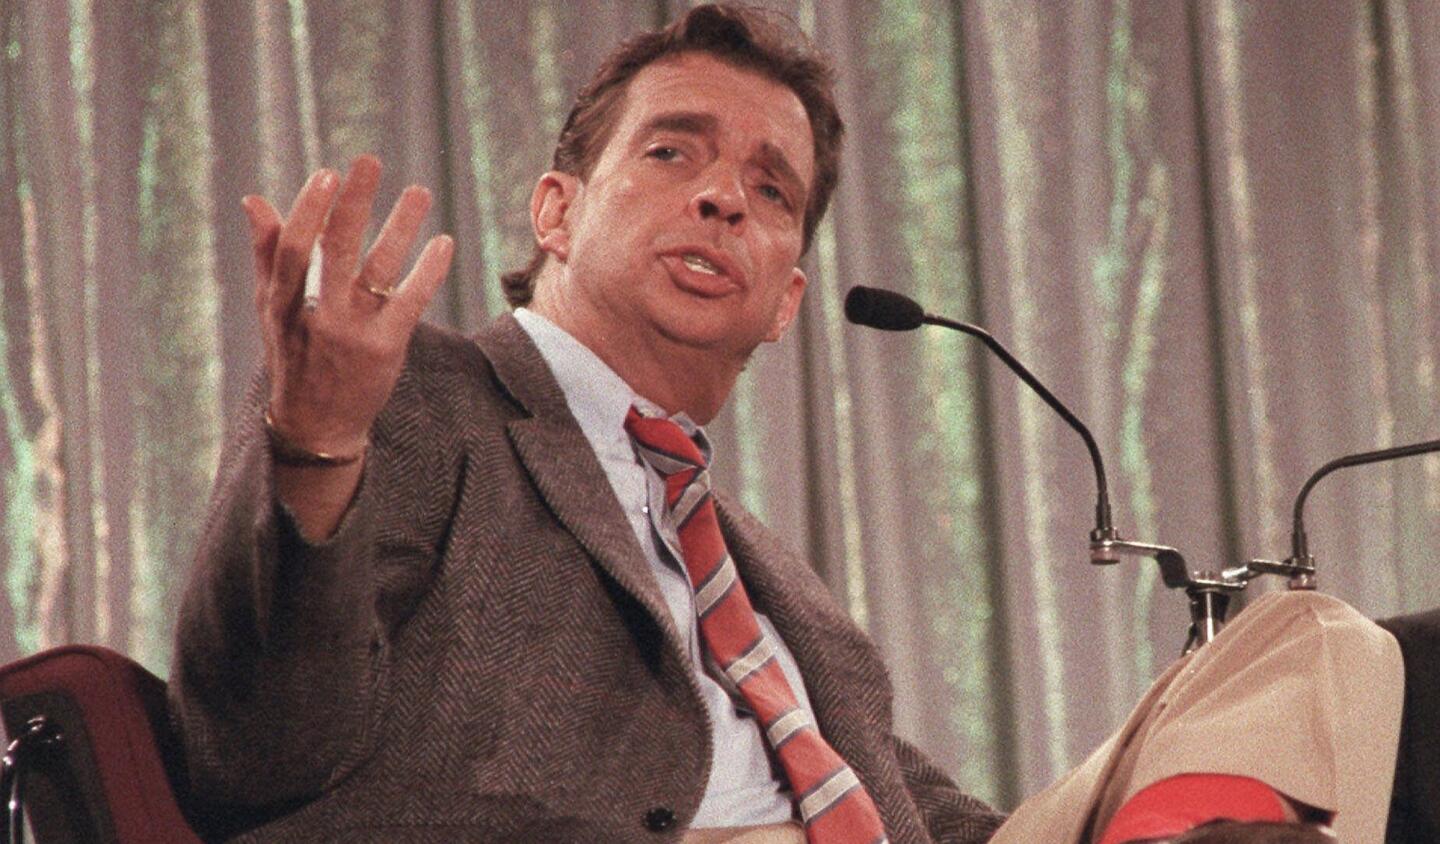 "The Morton Downey Jr. Show" expanded to national syndication in 1988, but distributors had trouble marketing the show to television stations because of its controversial nature. Viewership decline led to cancellation in 1989.